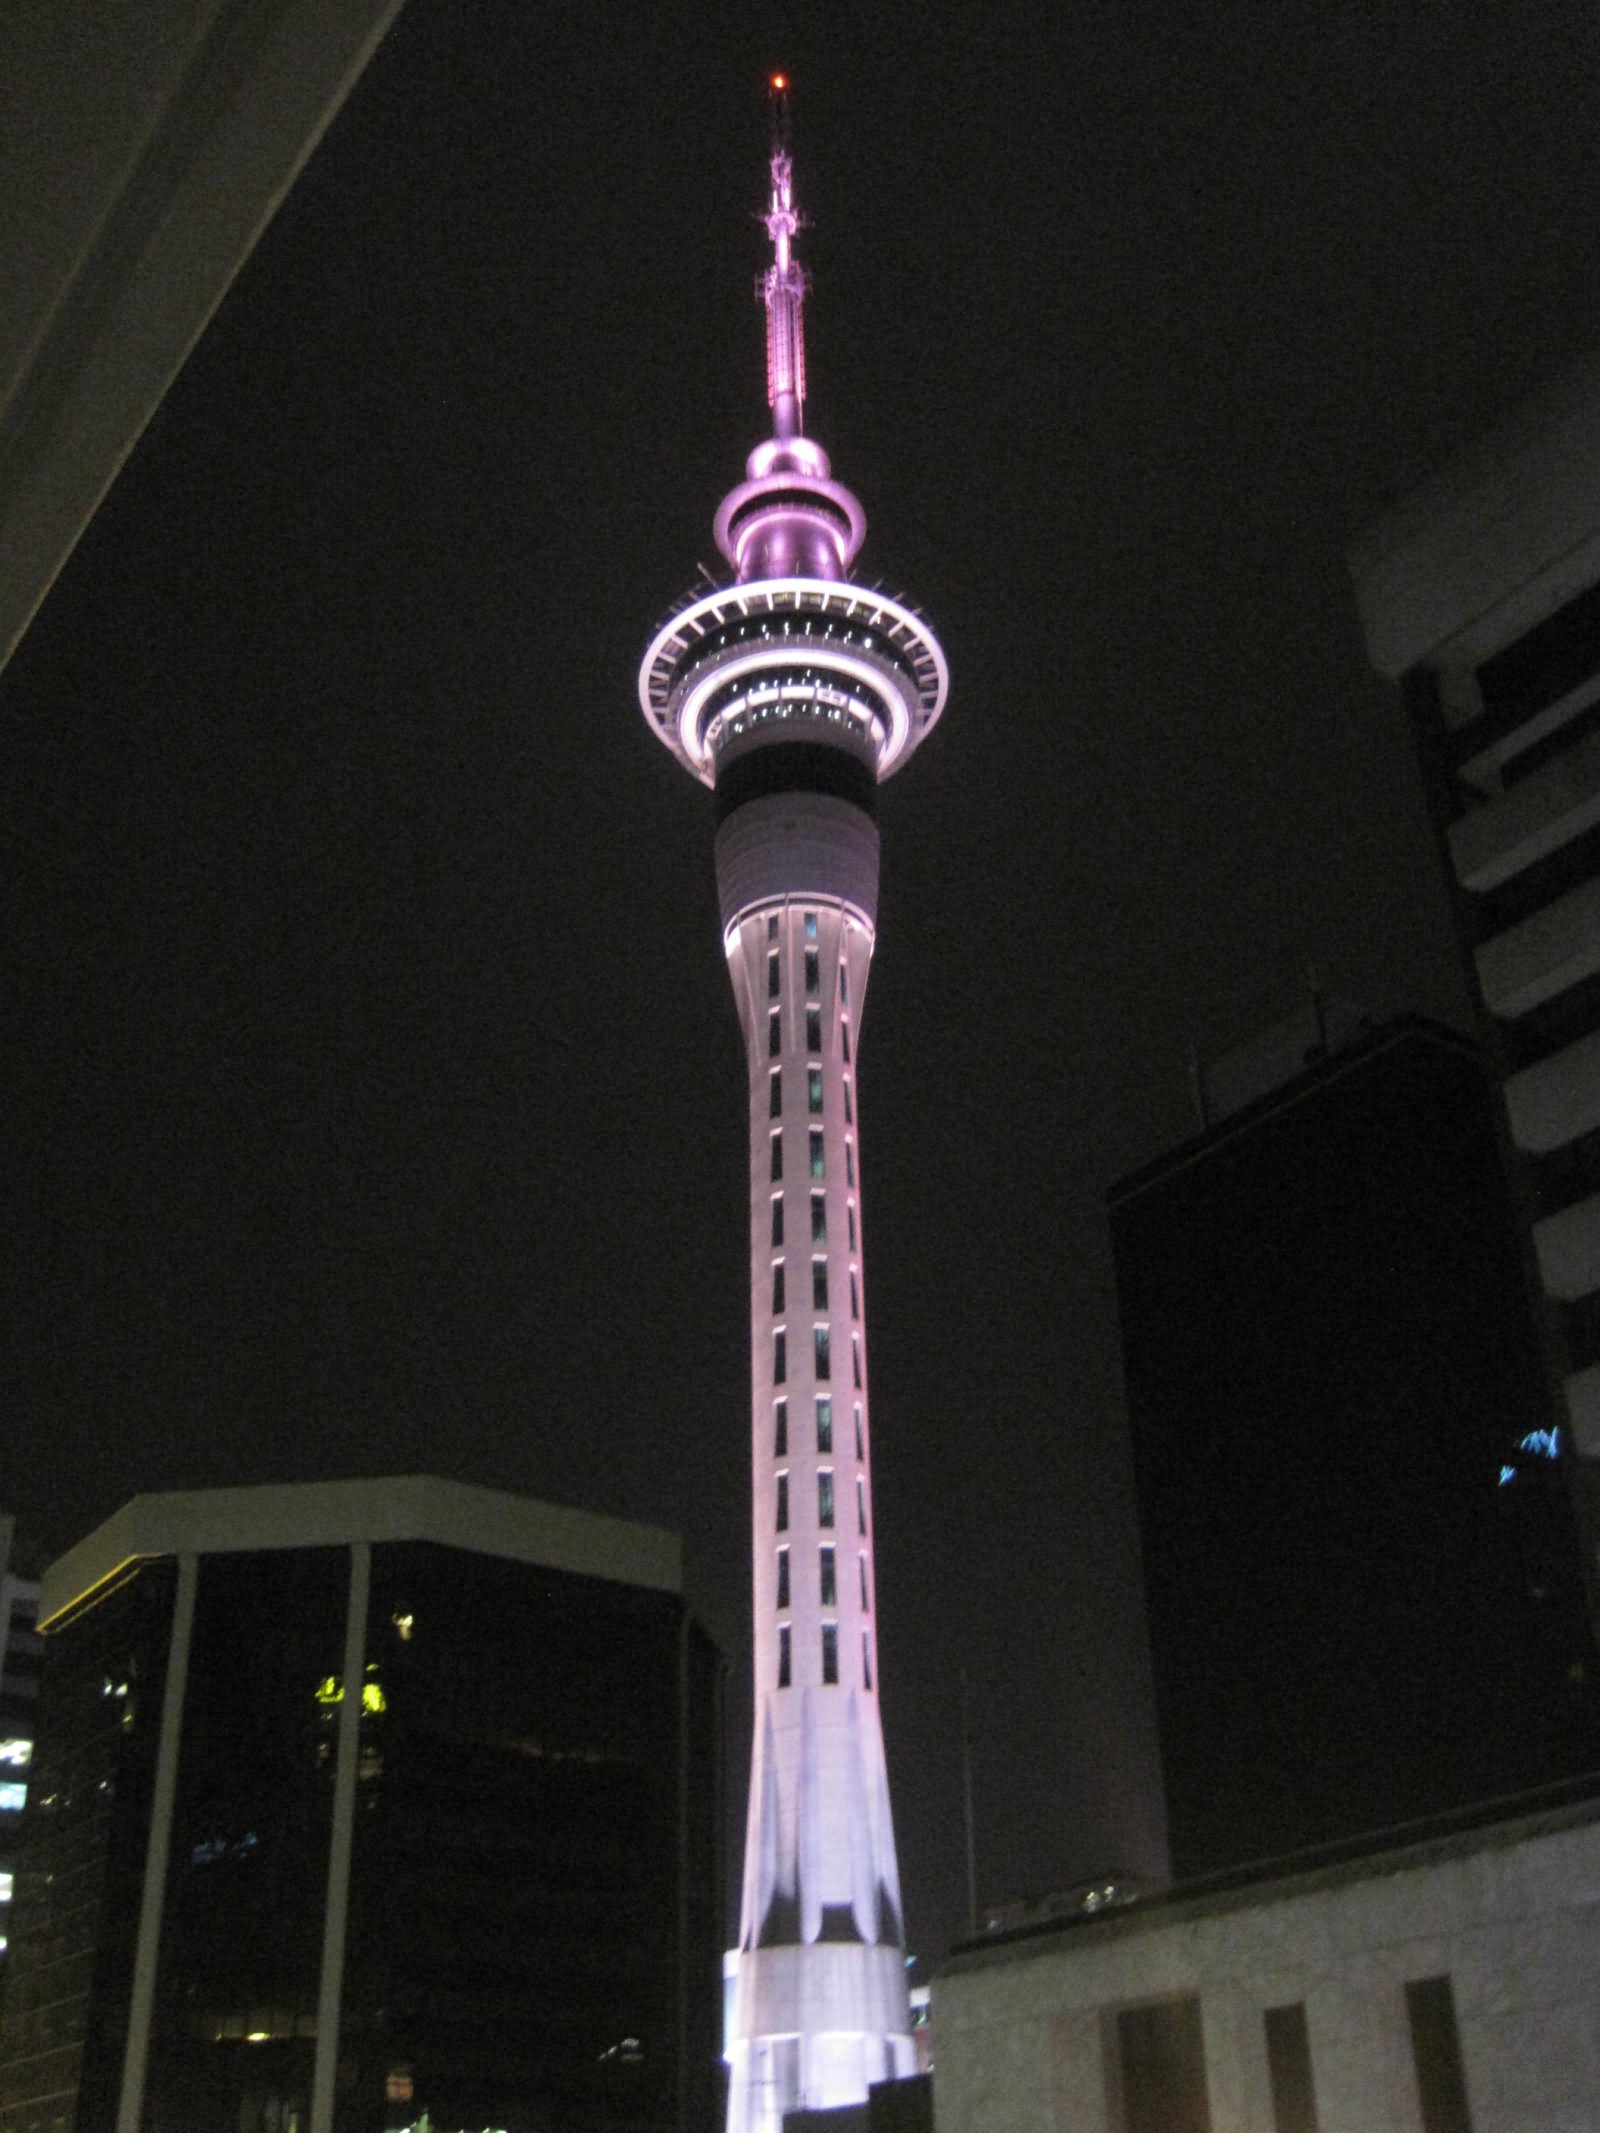 Amazing Night View Image Of The Sky Tower, Auckland